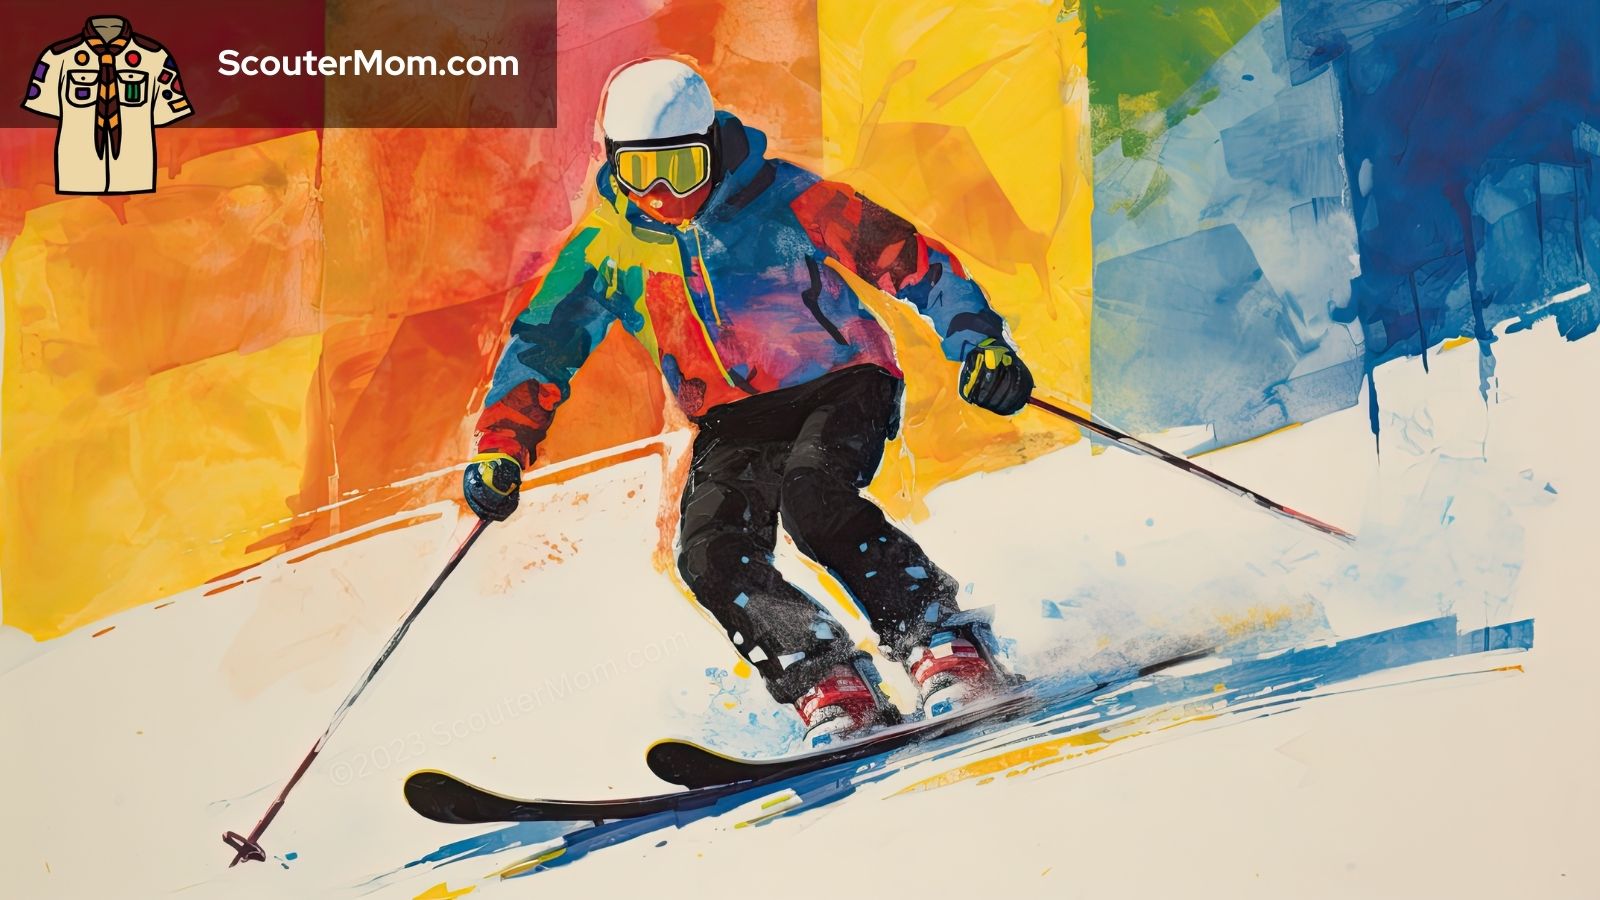 Snowboarding and Skiing Troop Program Feature